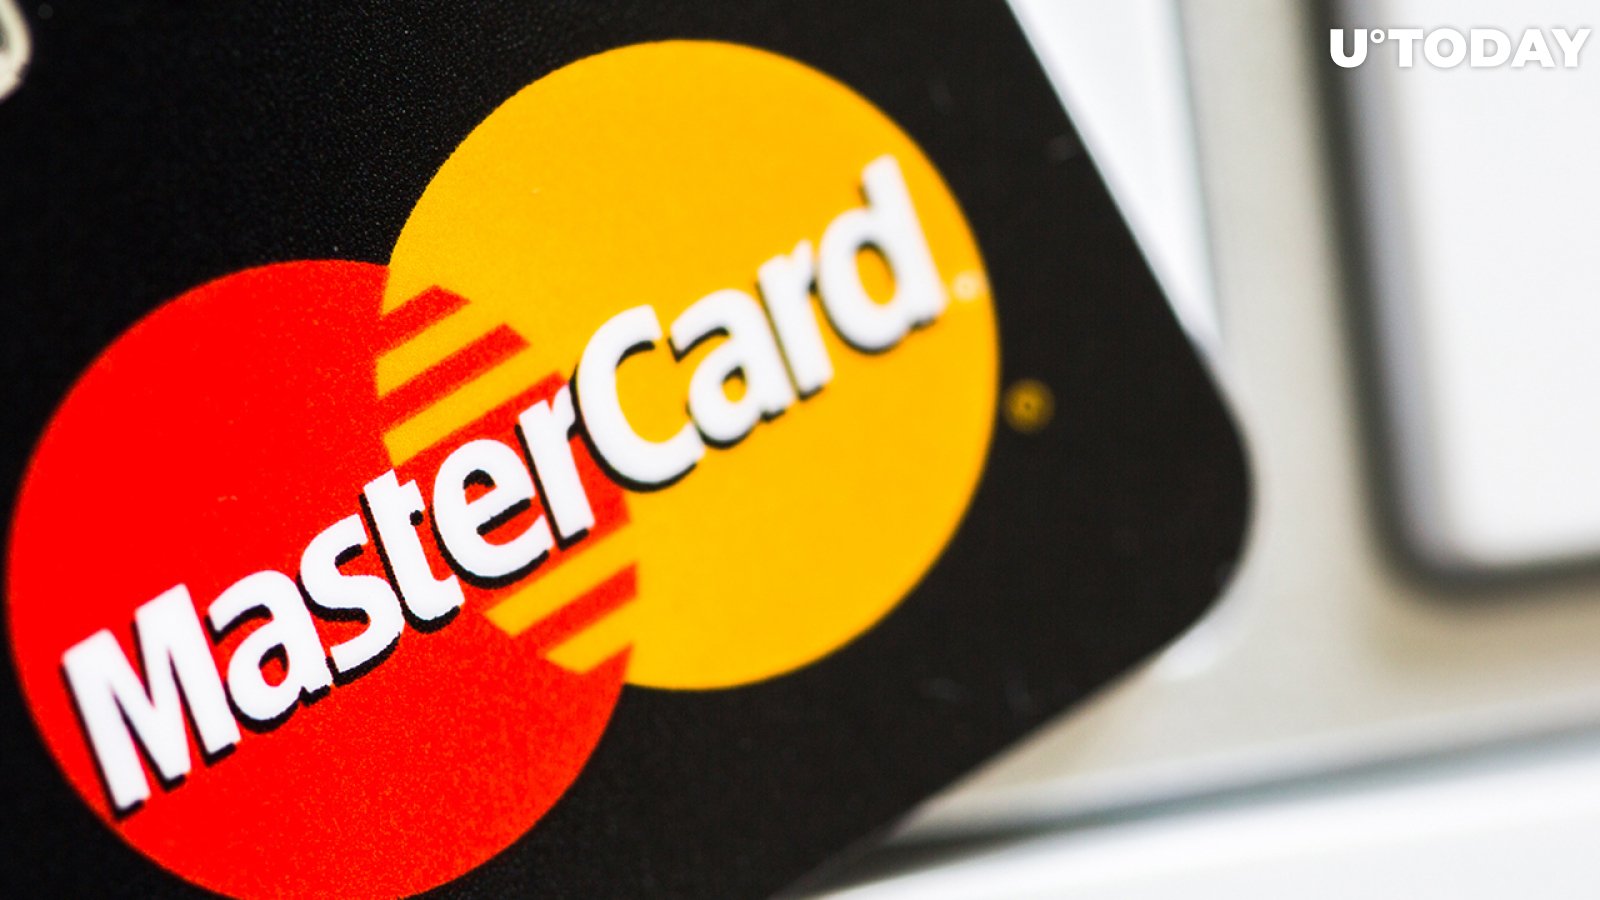 Mastercard's Top Exec Believes Crypto and Blockchain Likely to Be Adopted in Near Future